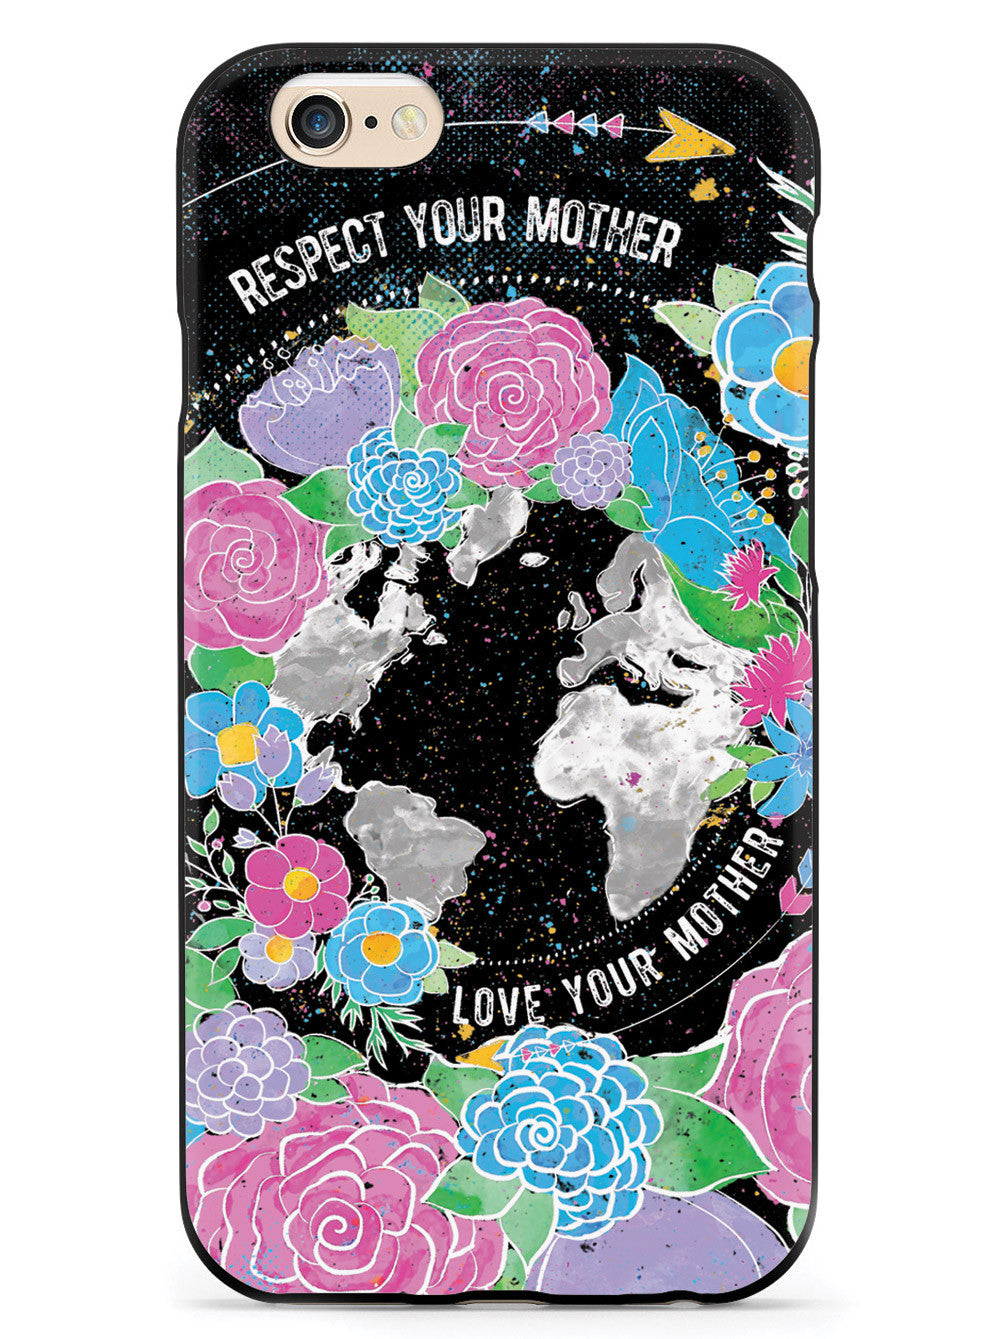 Respect & Love Your Mother - Earth Supporter - Black Case